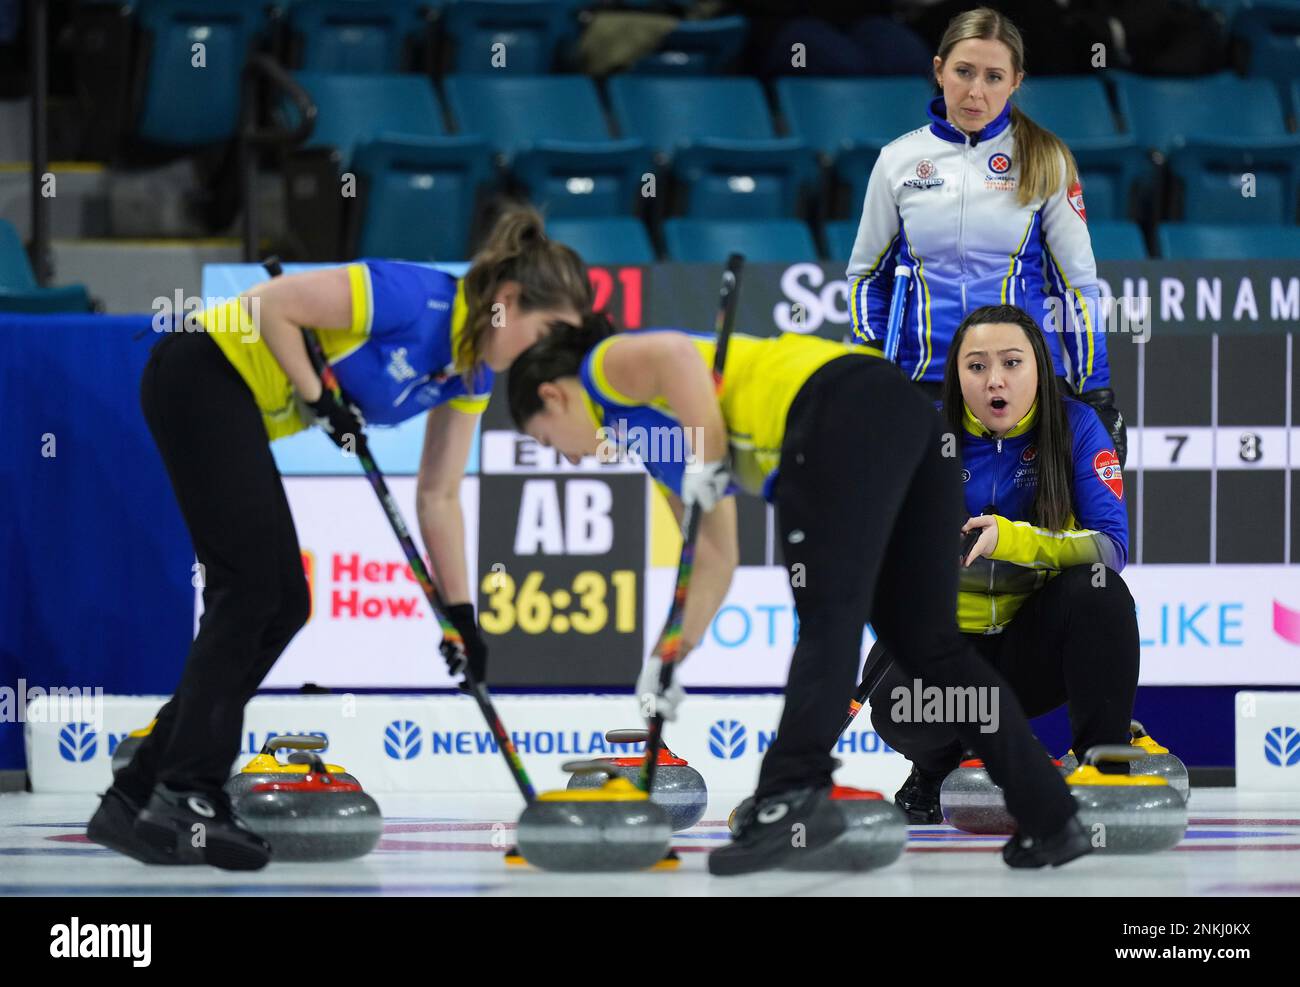 Alberta skip Kayla Skrlik, right, calls out to the sweepers as British Columbia skip Clancy Grandy, back right, watches during the Scotties Tournament of Hearts curling event Thursday, Feb